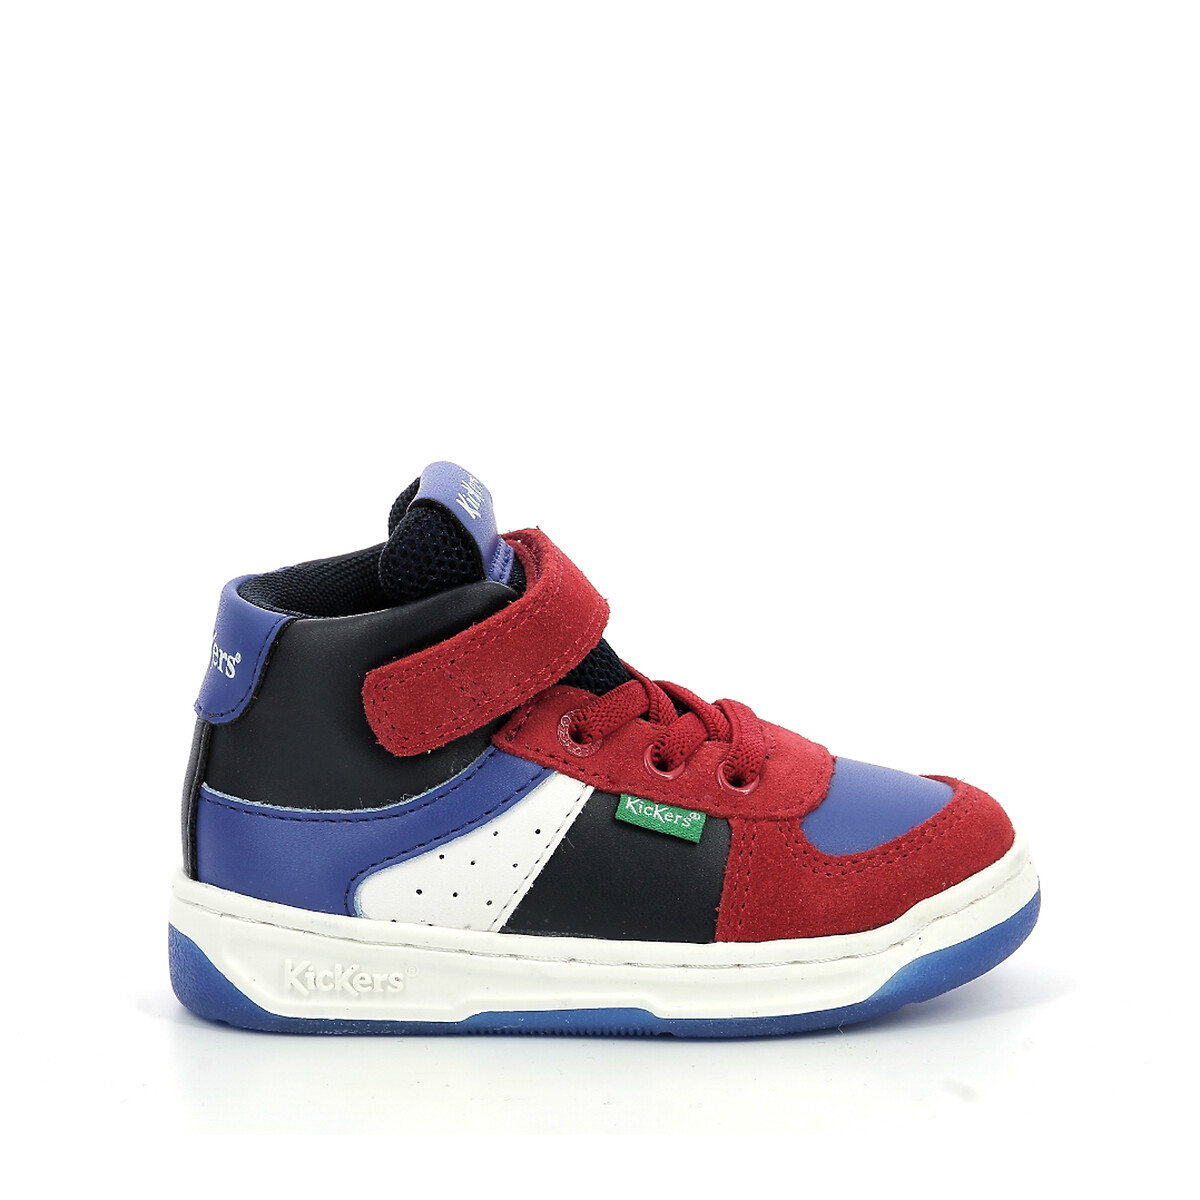 Kids Kickalien High Top Trainers with Touch ’n’ Close Fastening